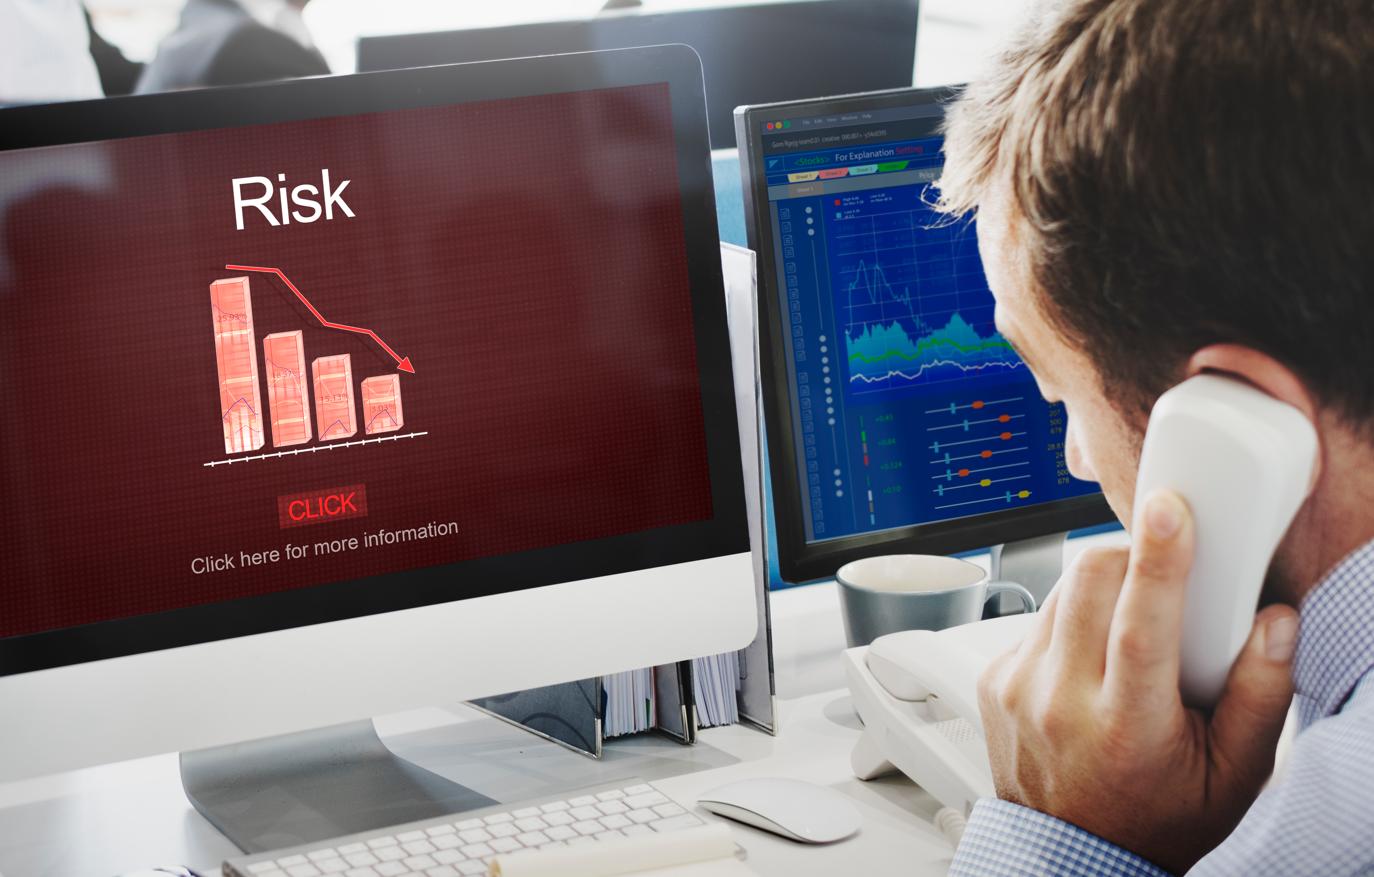 A trader is calculating risk per trade in cryptocurrency trading